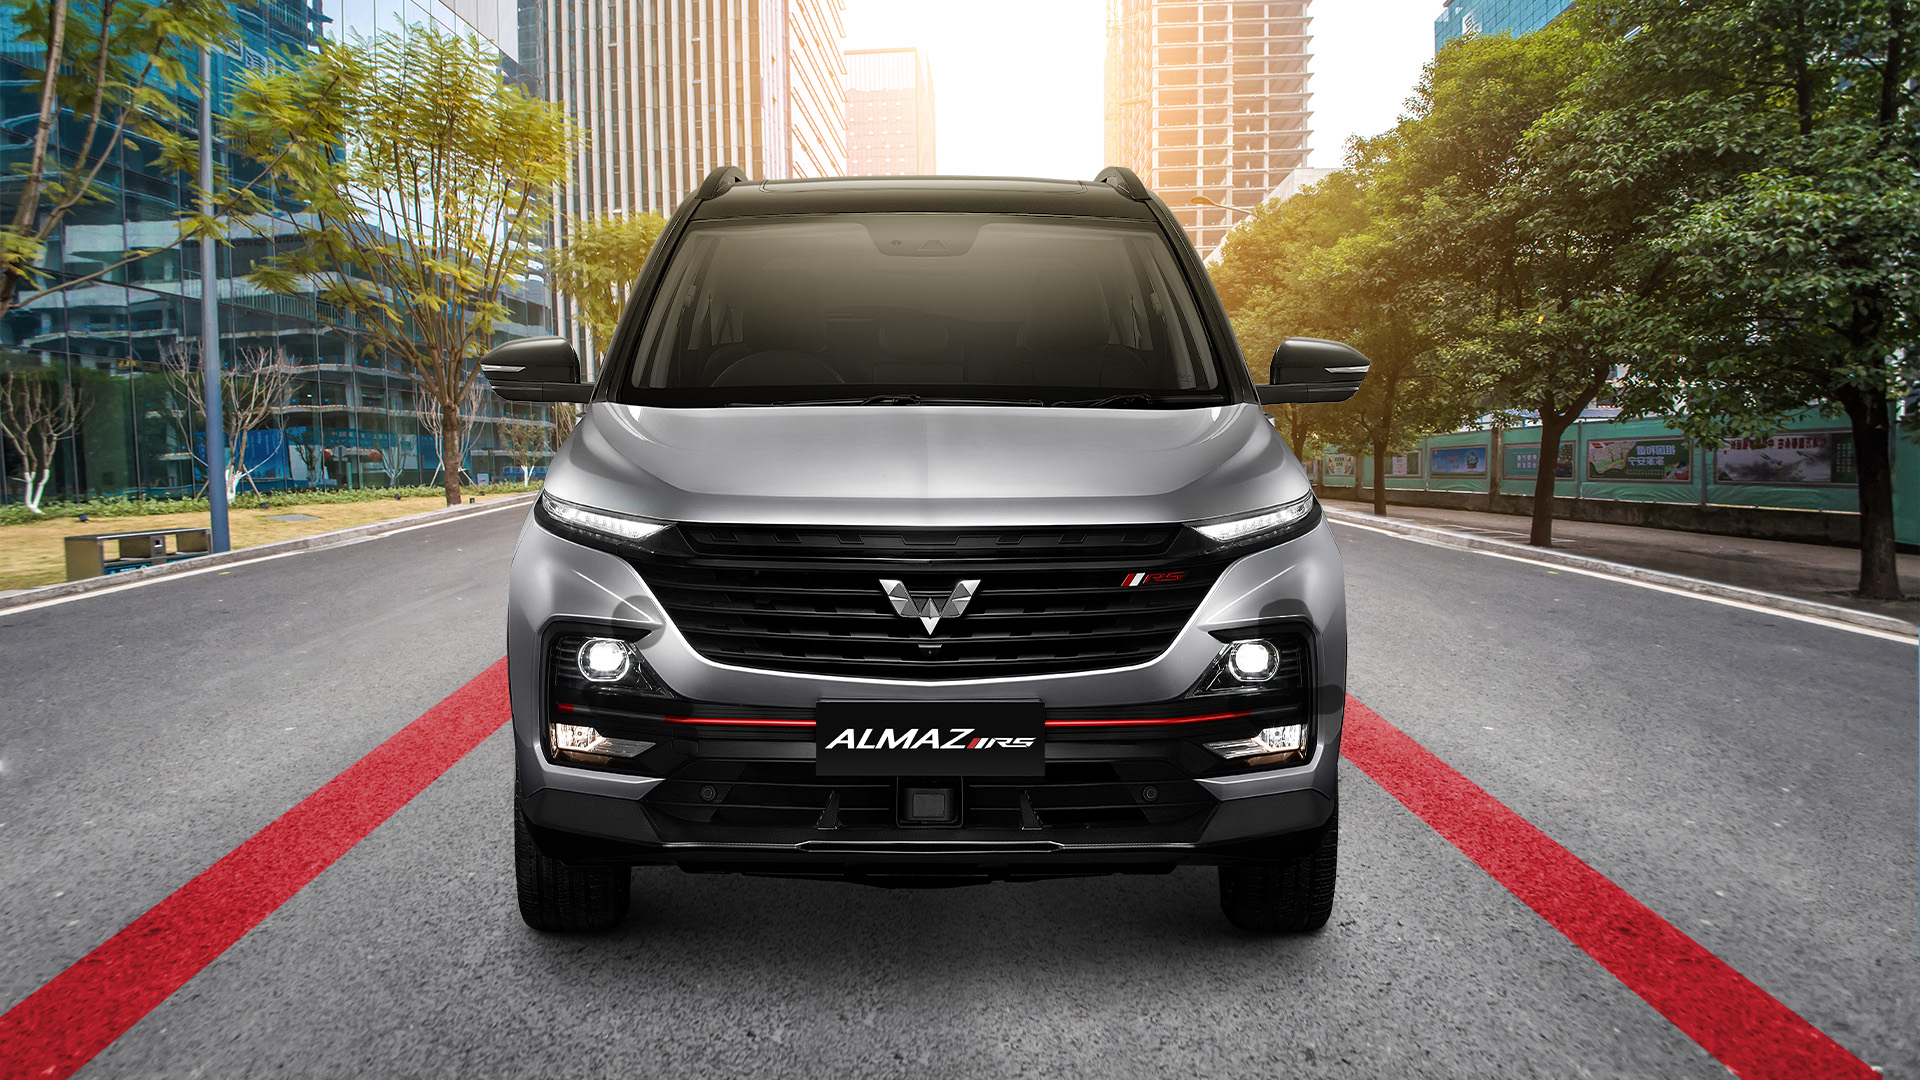 Image Lane Departure Warning, Important Safety Features for Wuling Cars